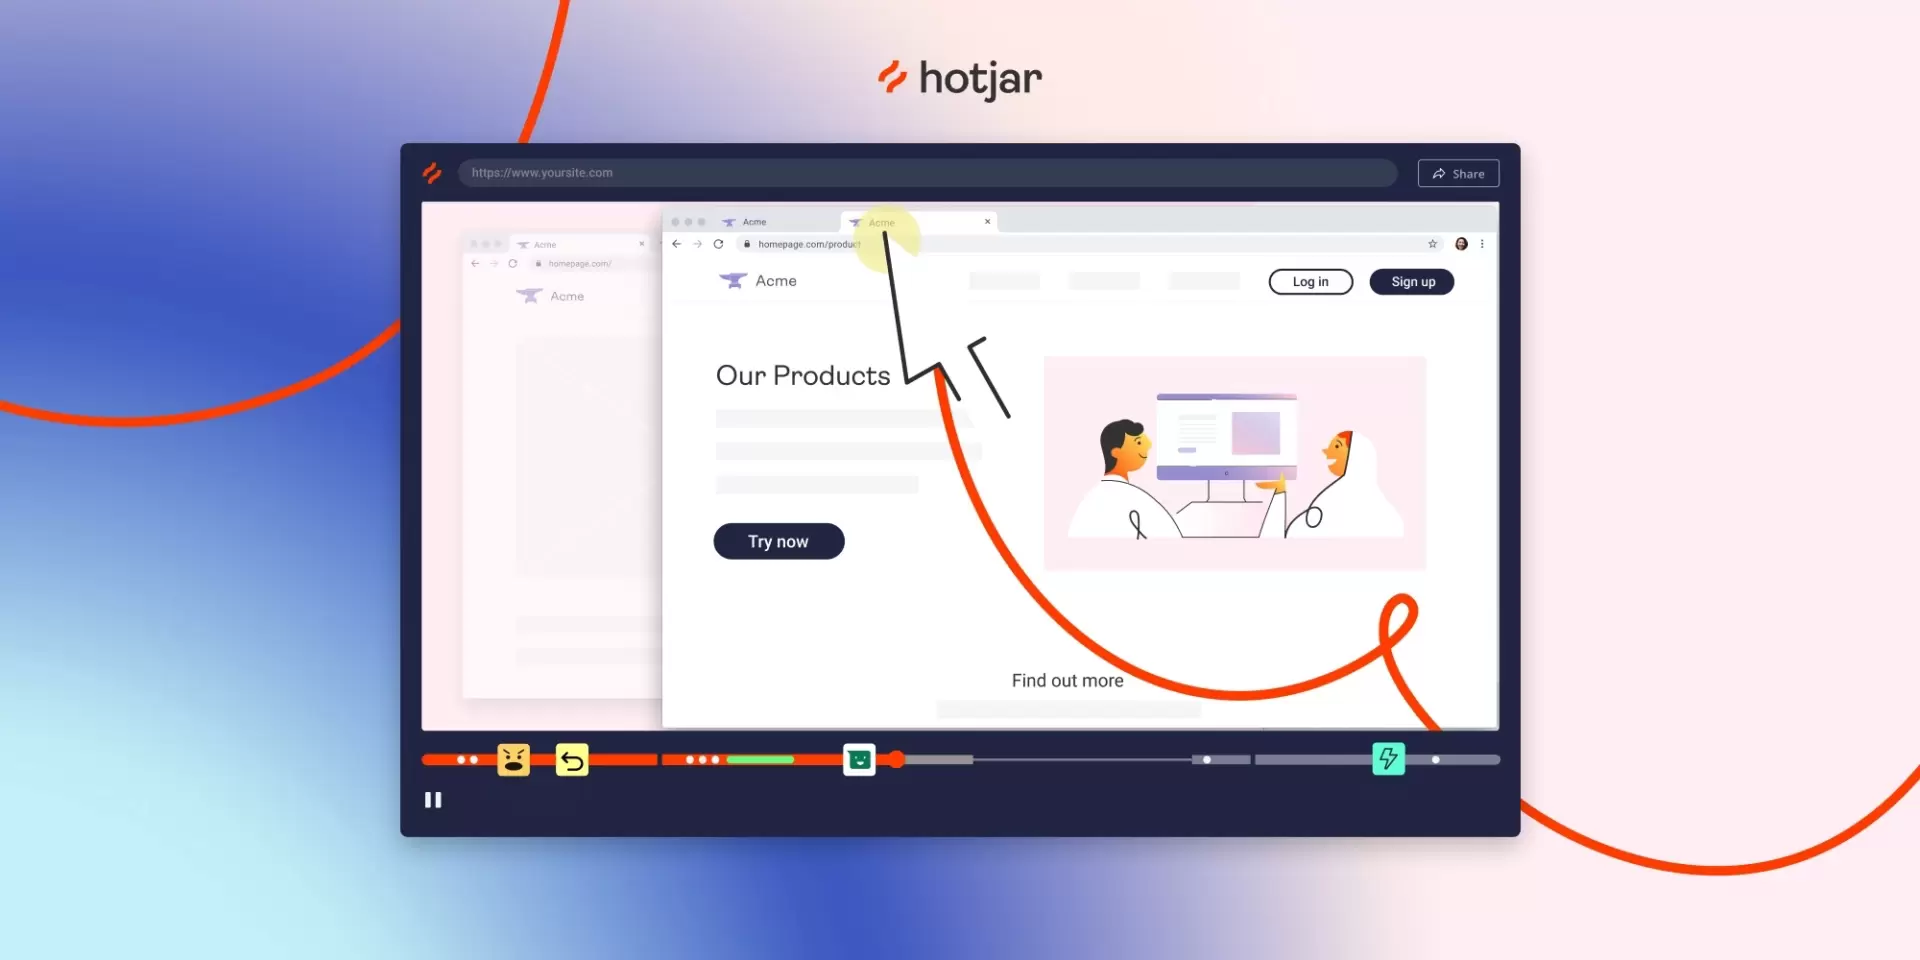 recording sessions of real users in Hotjar